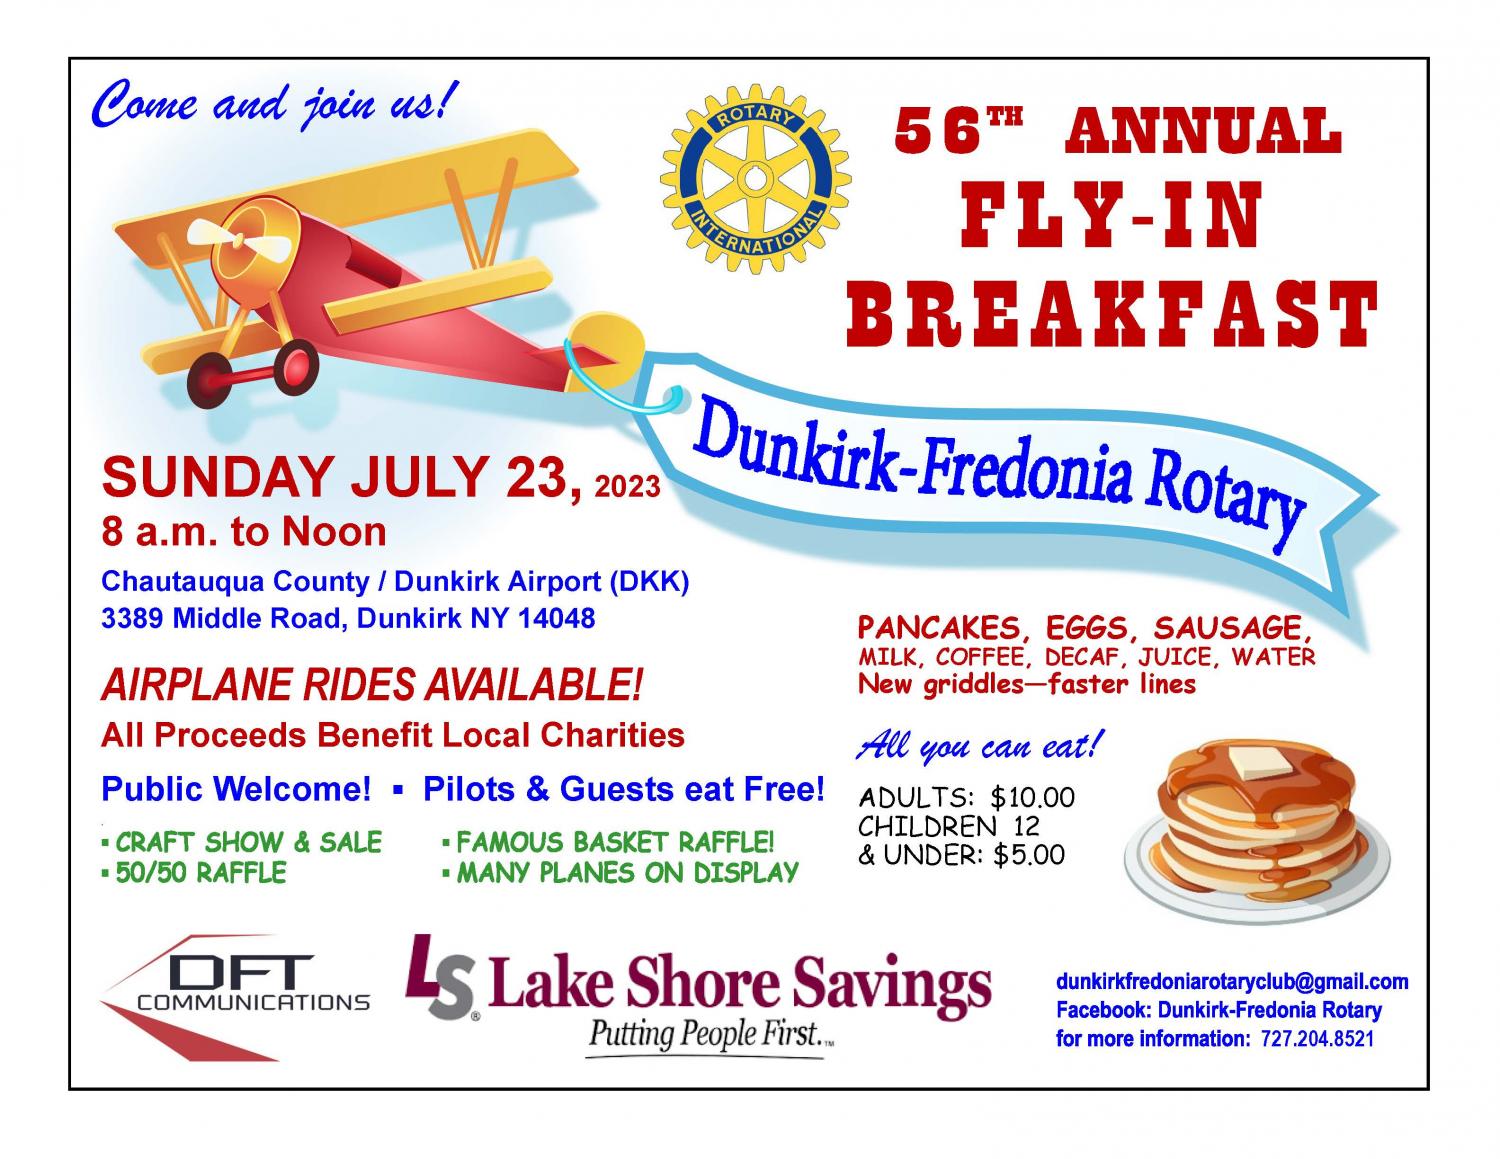 56th Annual Fly-In Breakfast at the Dunkirk Airport (DKK)